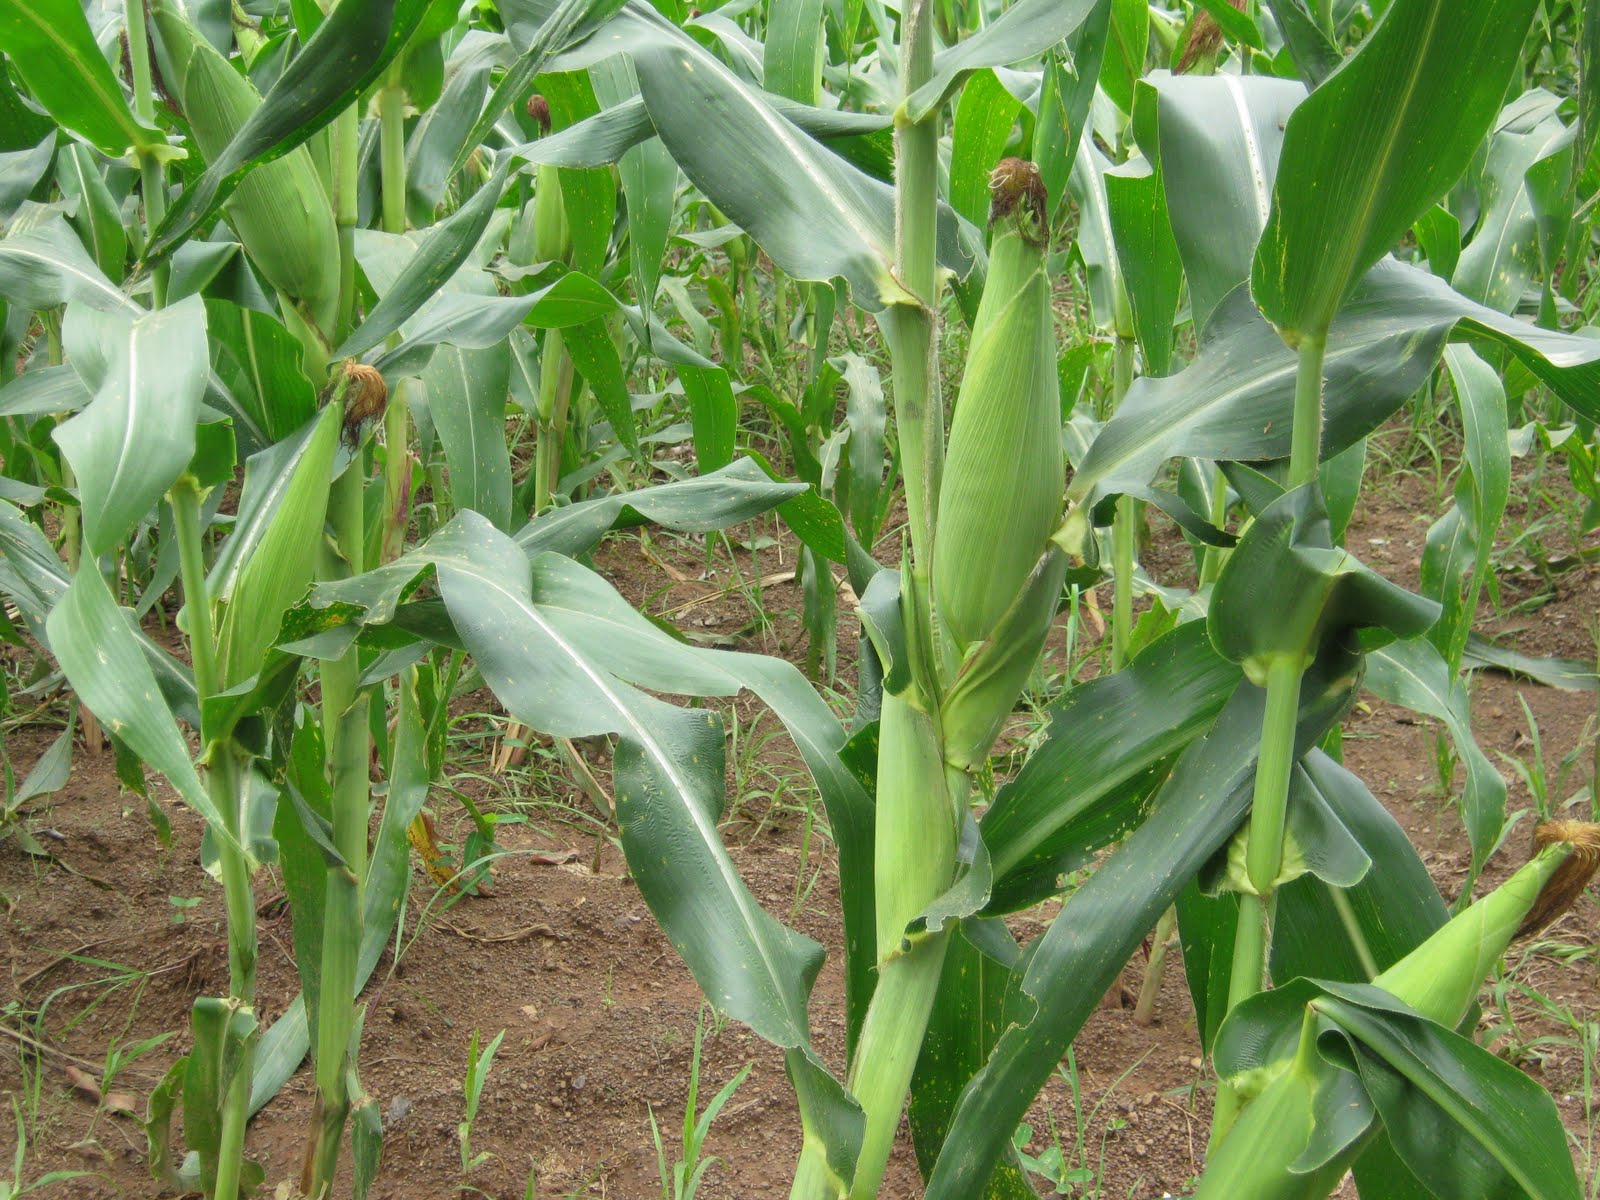 How to make millions from maize farming in Nigeria this seam